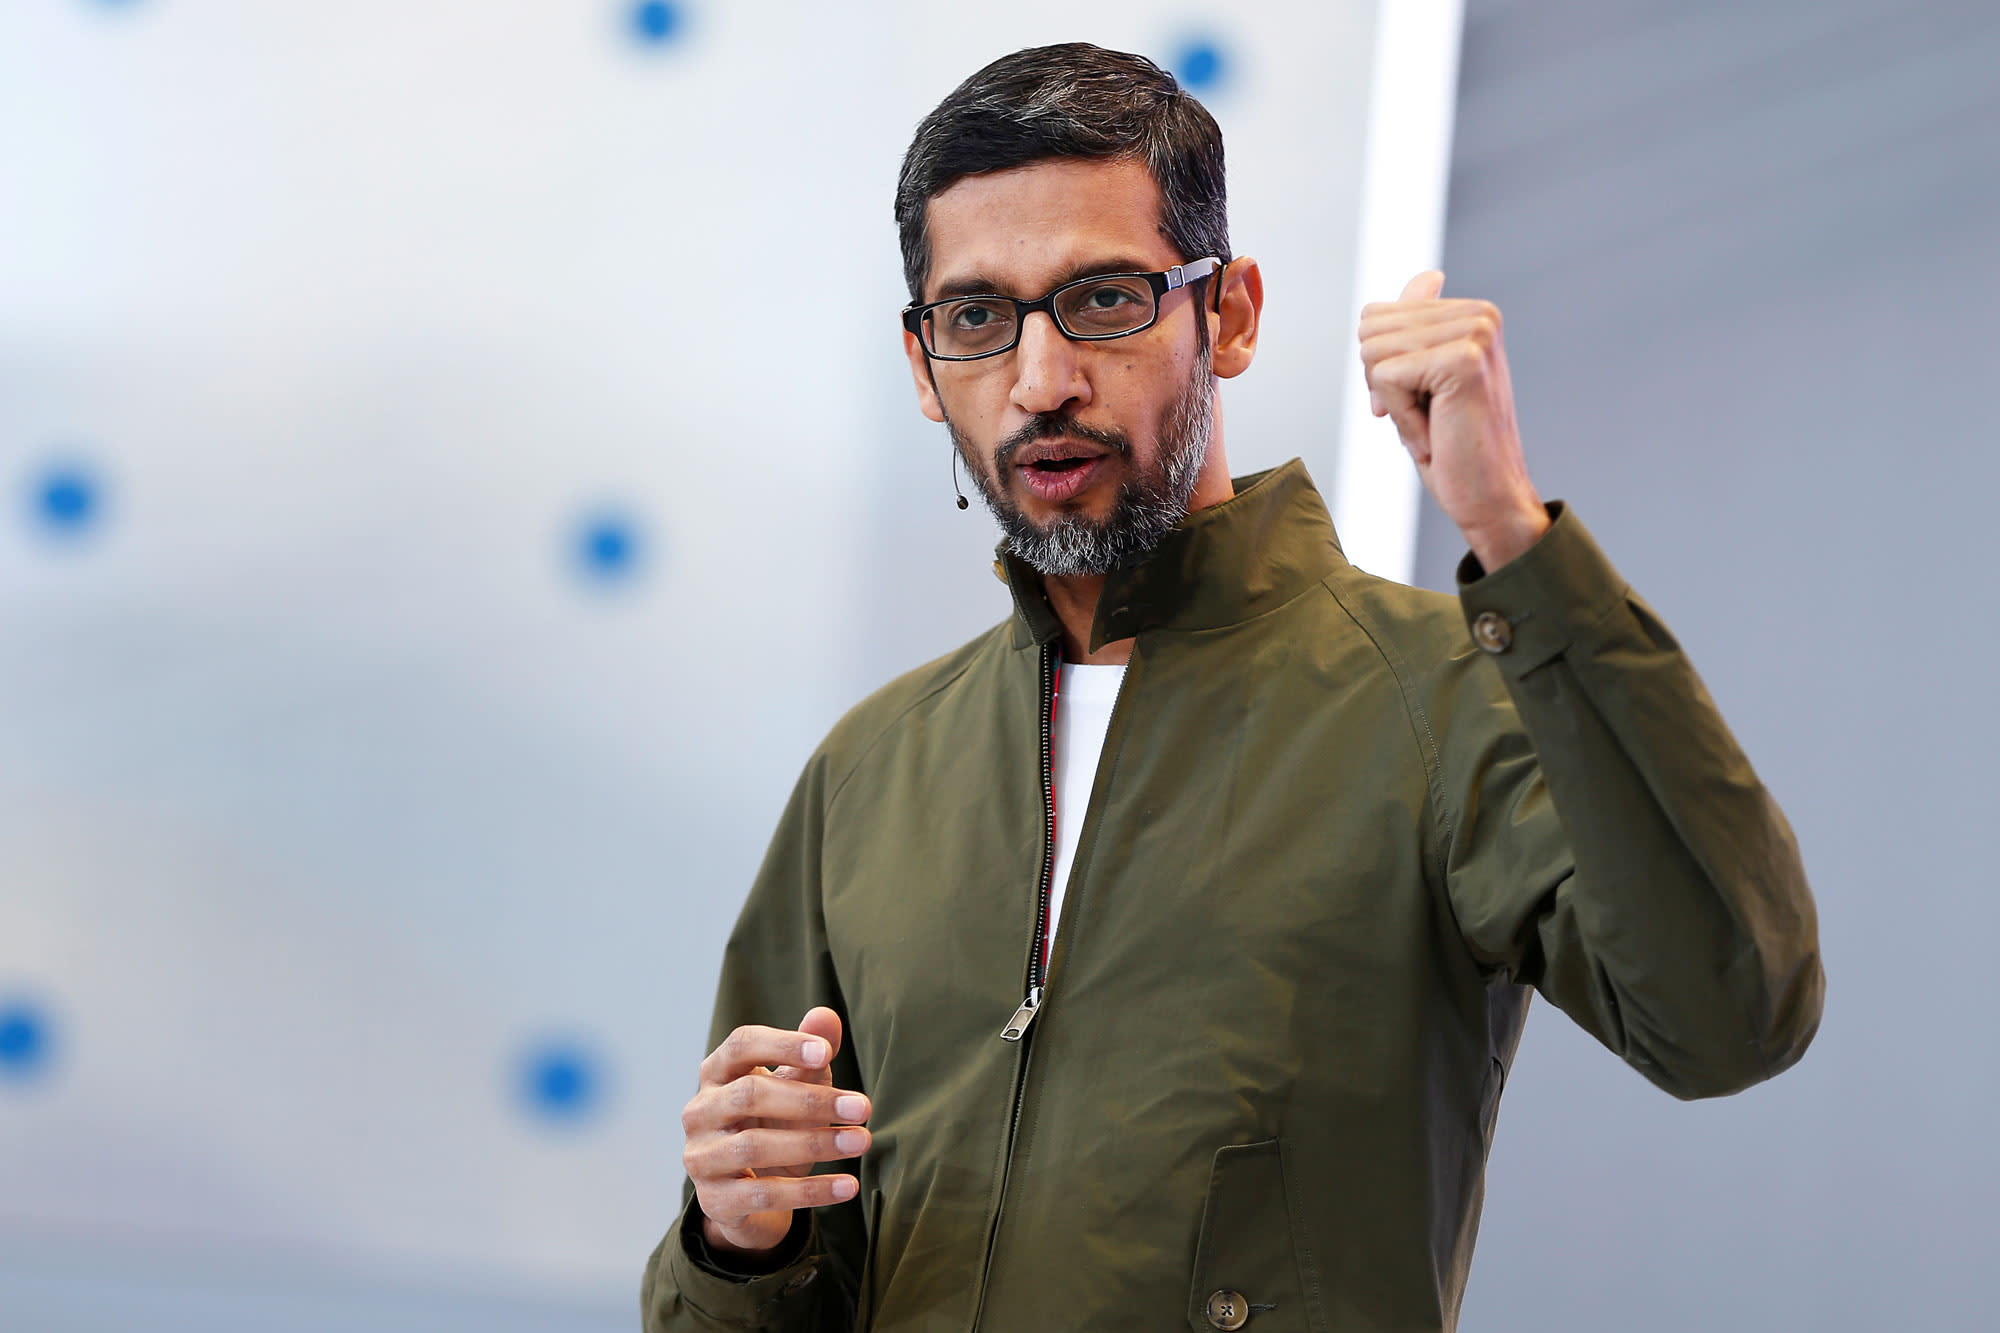 Google to spend $ 7 billion on data centers and offices in 2021